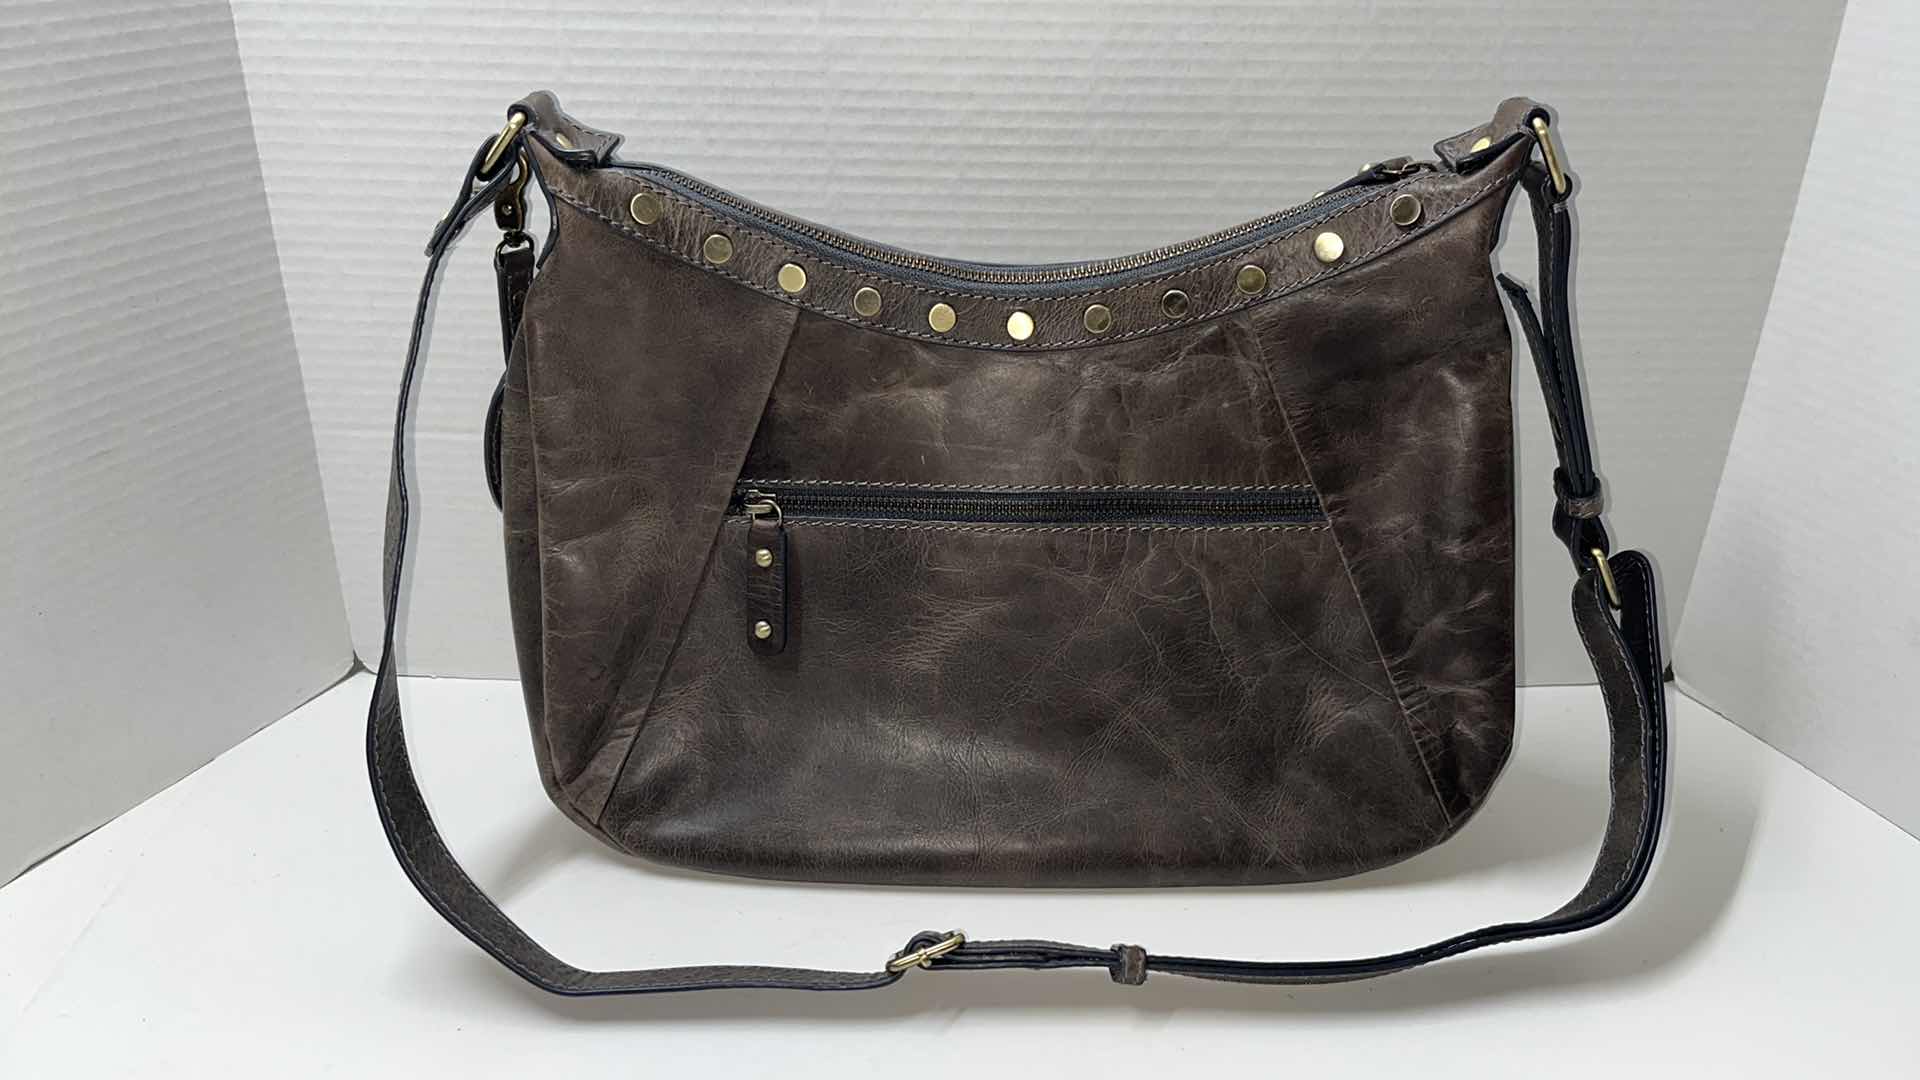 Photo 3 of BORN STUDDED LEATHER LARGE CROSSBODY BAG W RUBBED BRONZE EMBELLISHMENTS, RUSTIC BROWN